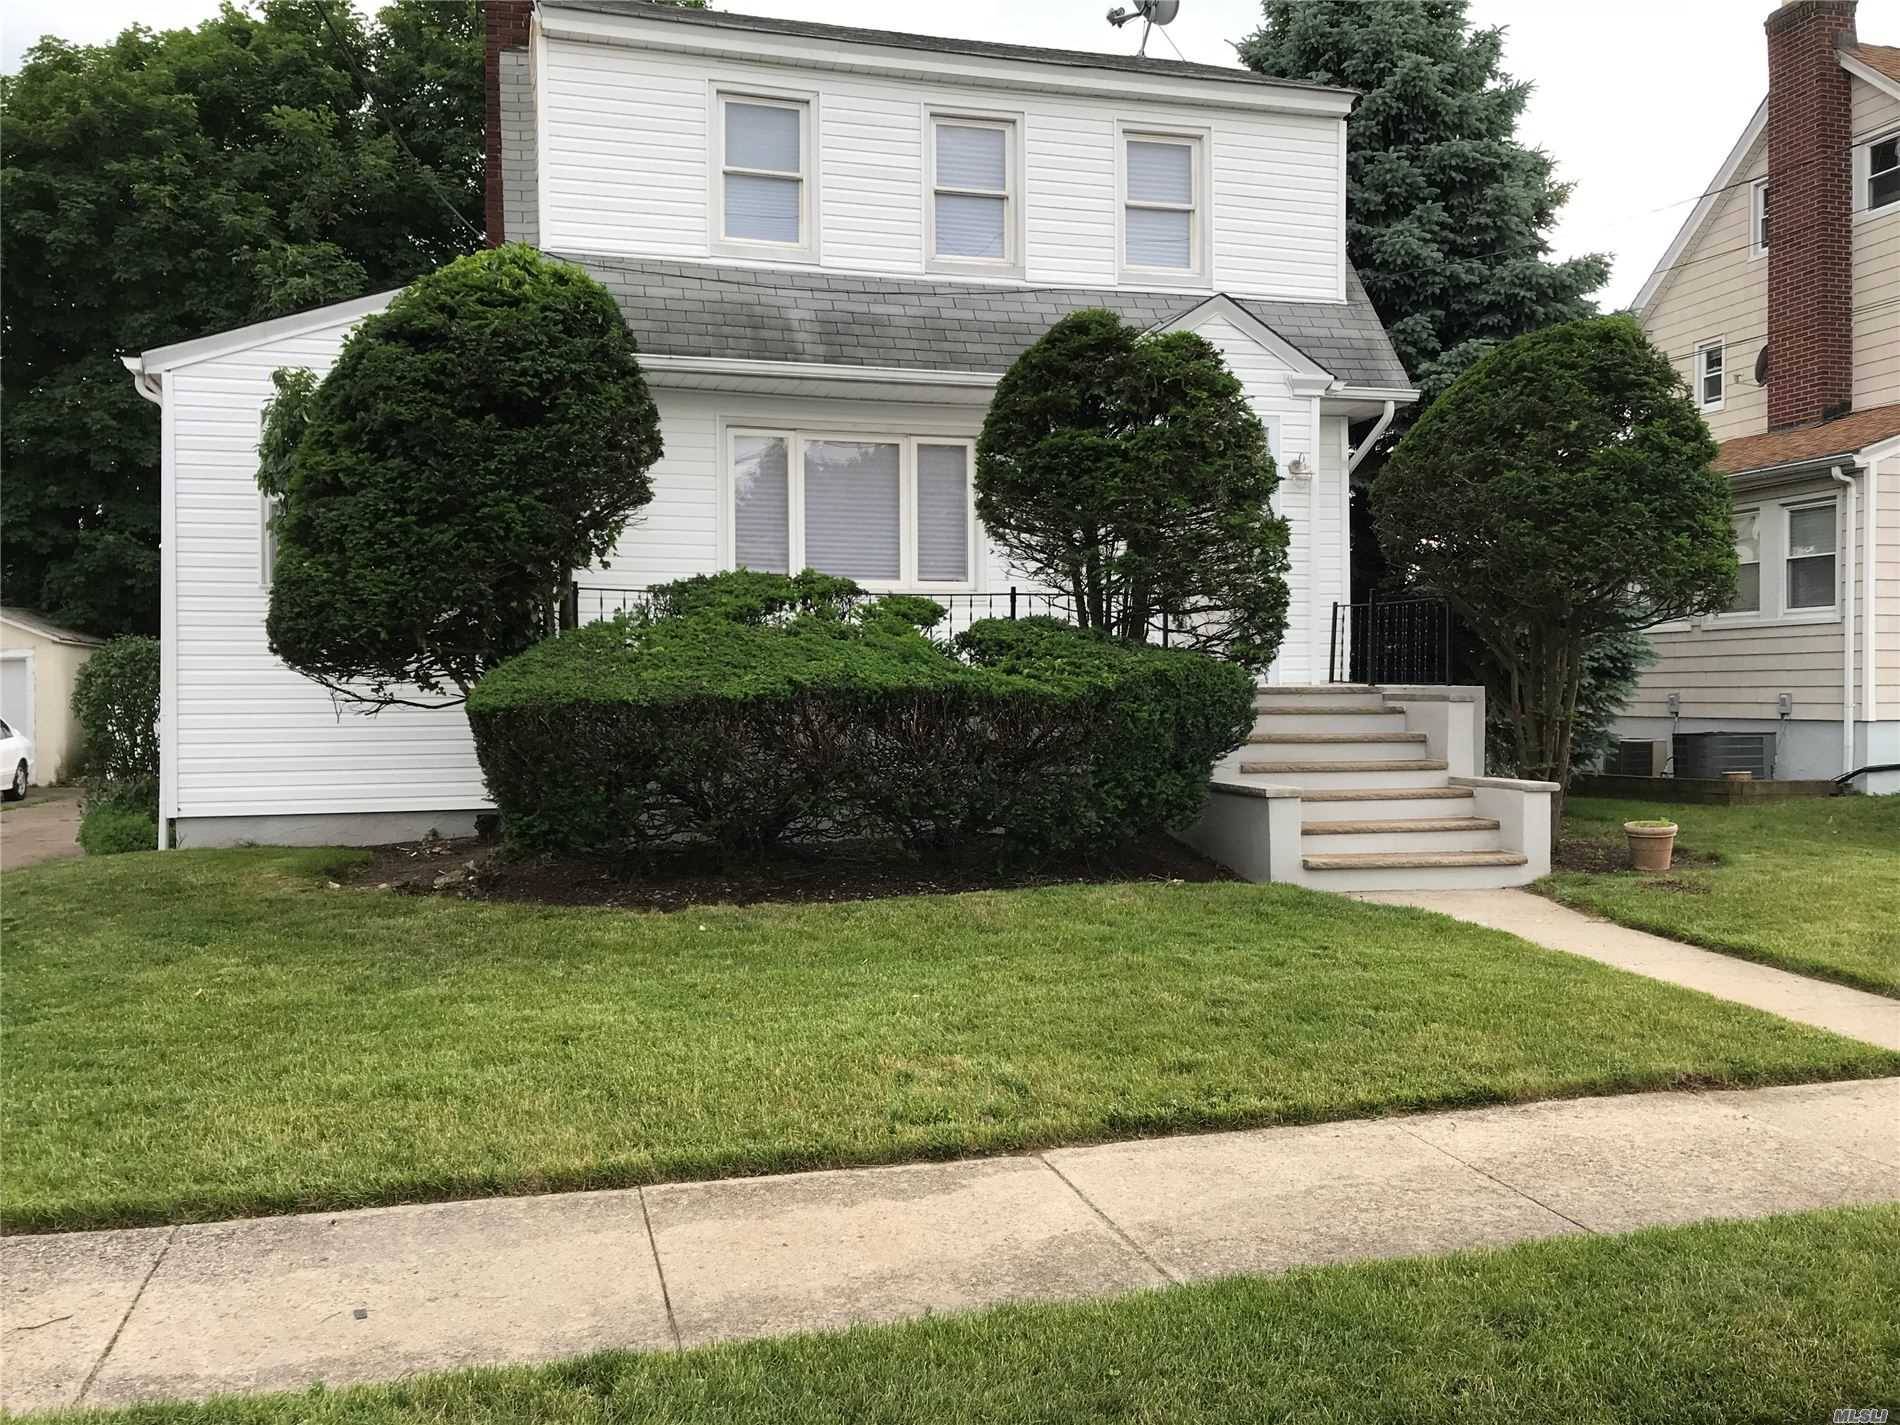 SD 14, nicely renovated 4 br colonial, great location walk to LIRR, shopping, schools and house of worship.